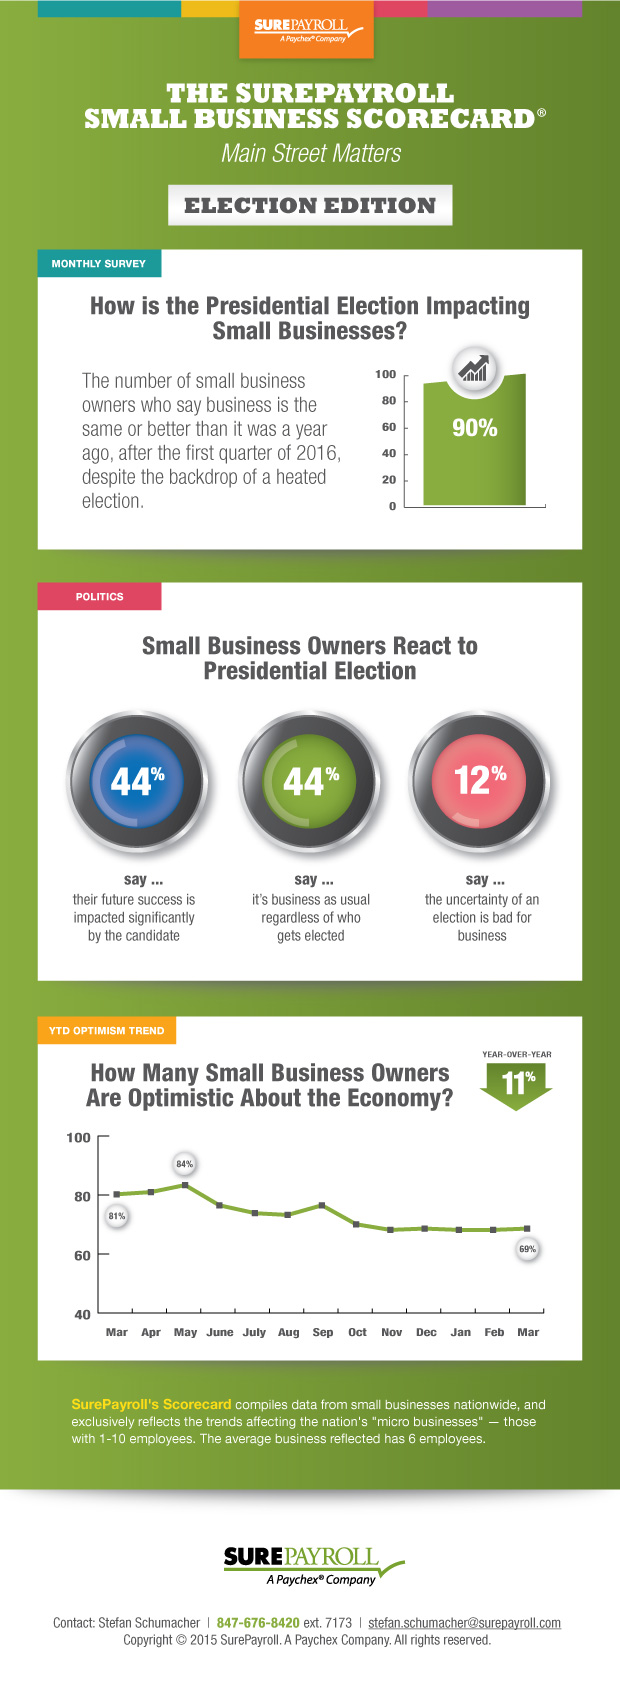 Surepayroll Small Business Scorecard - the Election Edition (infographic)